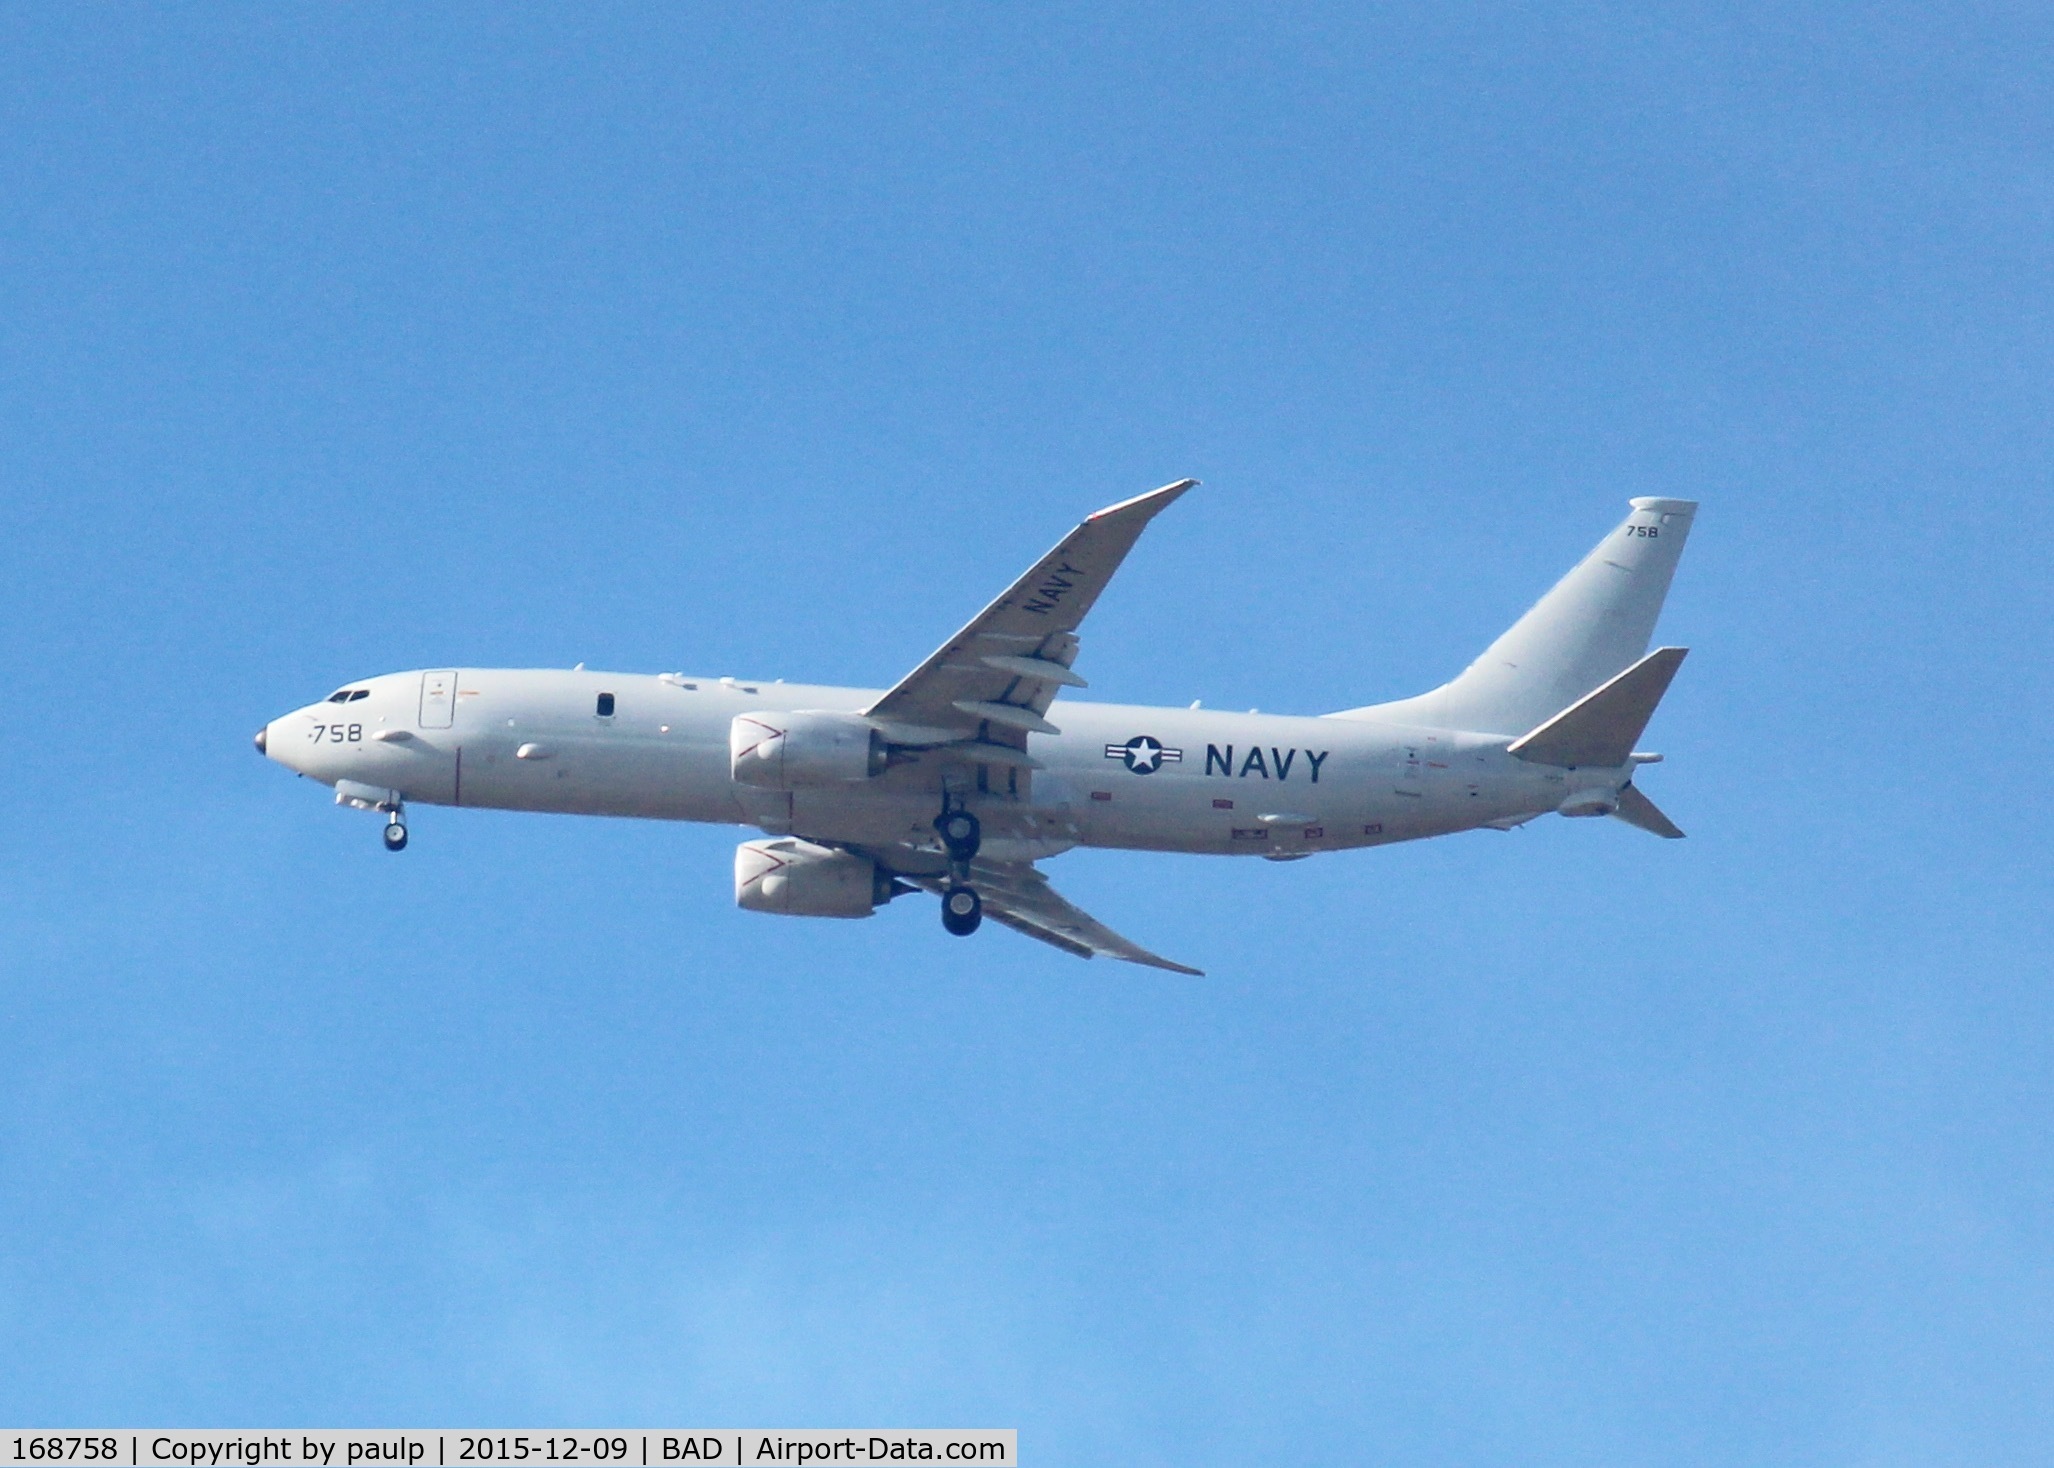 168758, 2014 Boeing P-8A Poseidon C/N 42254, At Barksdale Air Force Base.